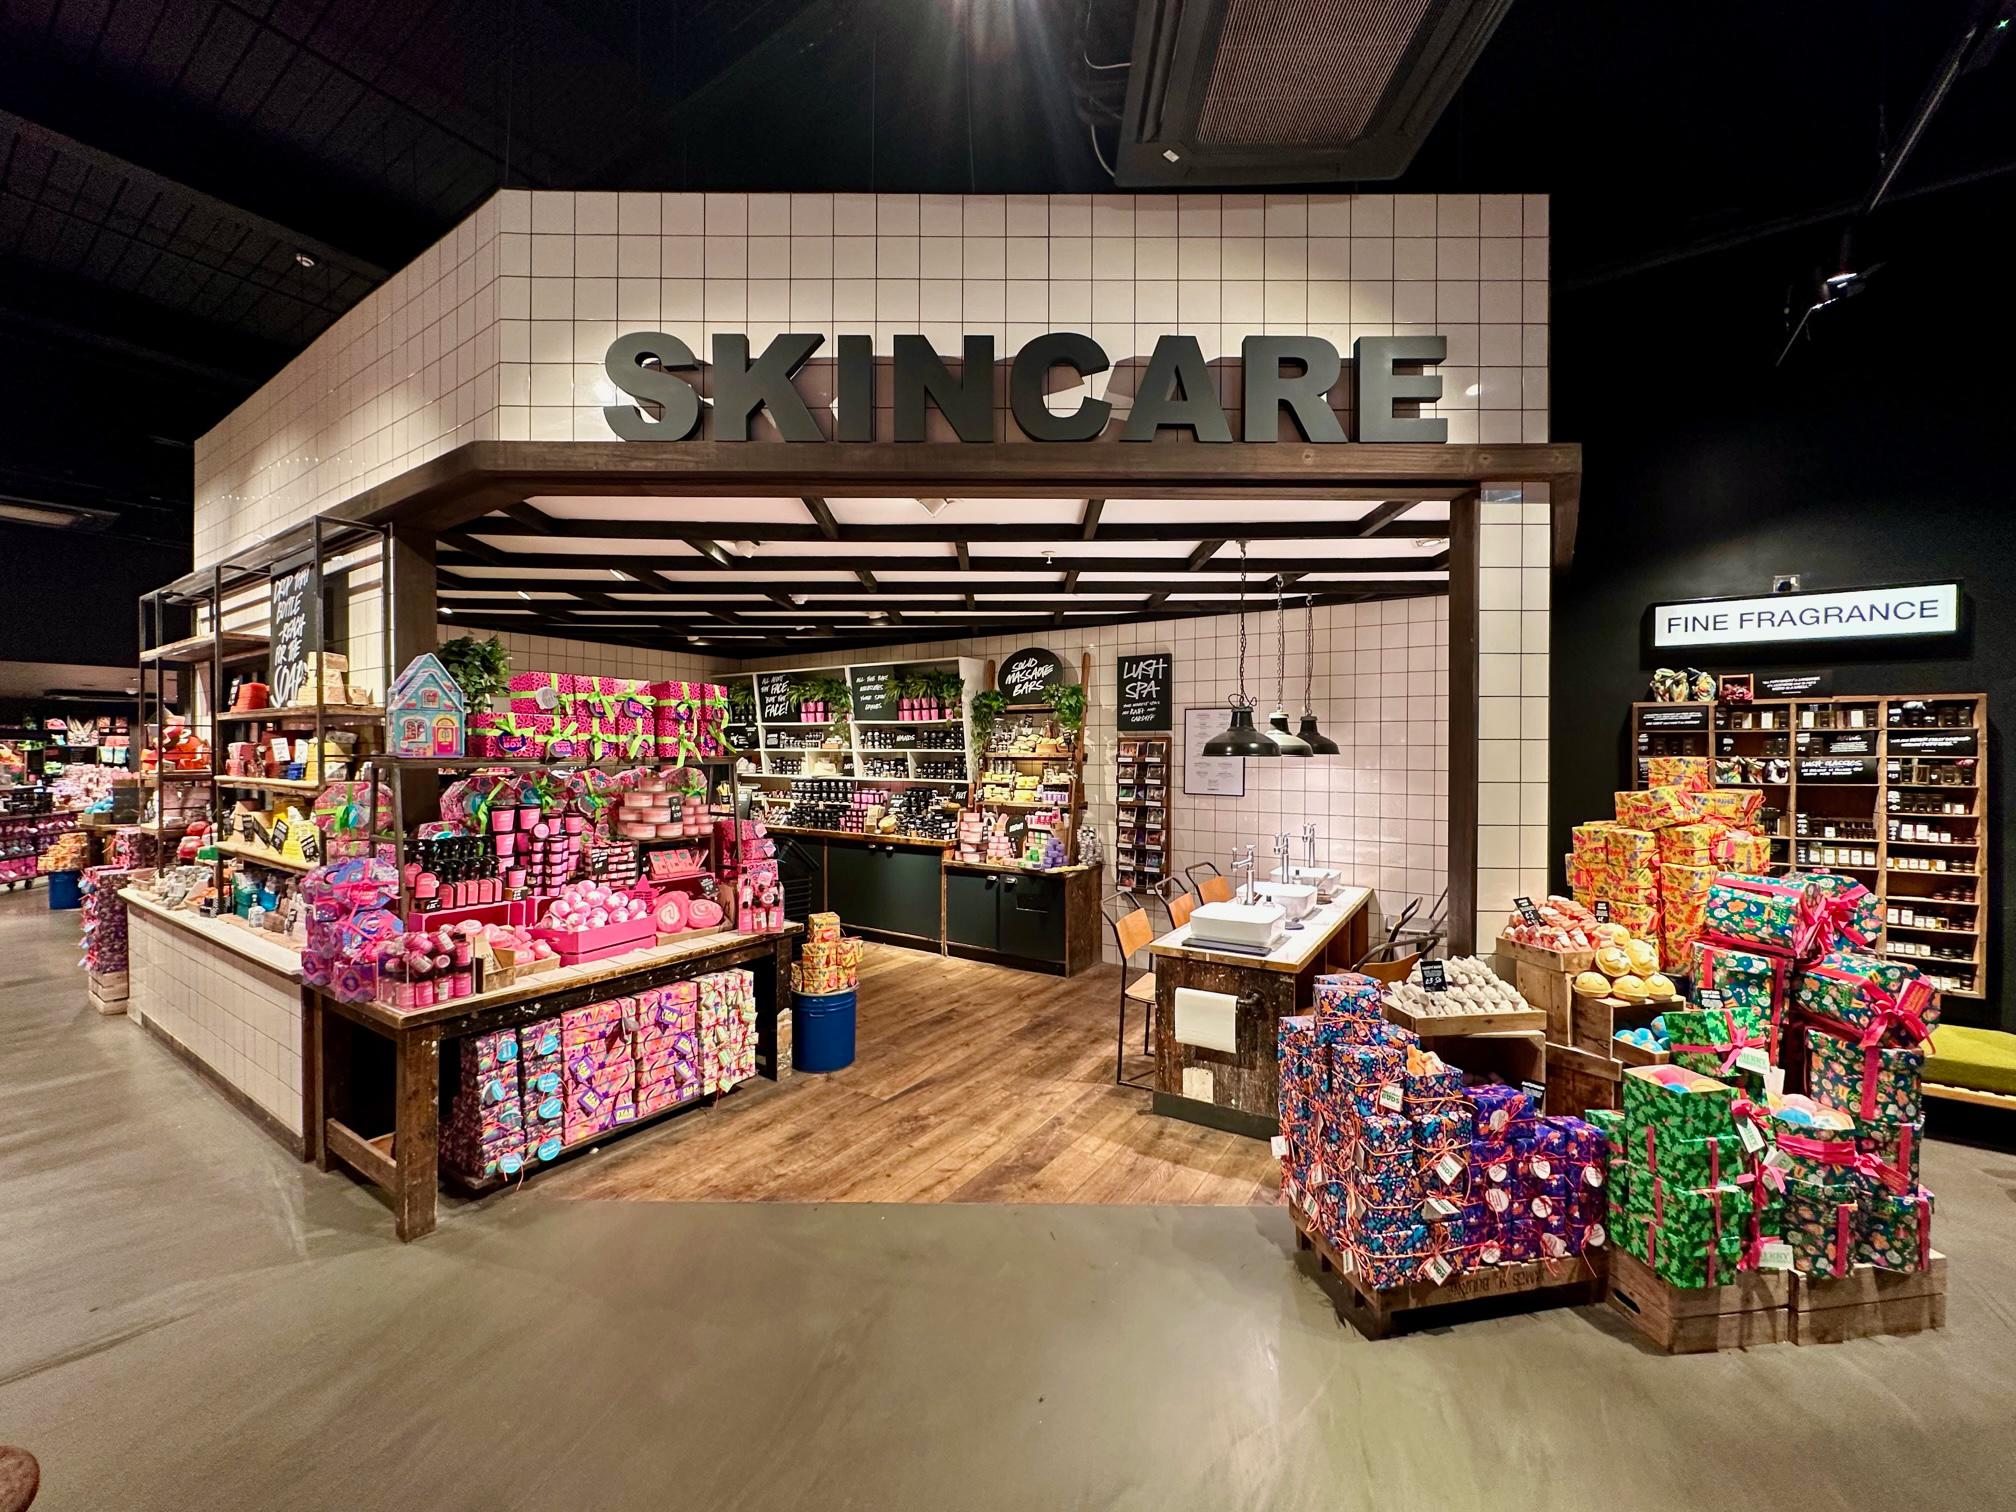 A smaller building with a large black sign saying skincare. On both sides of the entrance are large piles of brightly coloured gifts. Inside the building are three white sinks and a wall full of pots and other products.